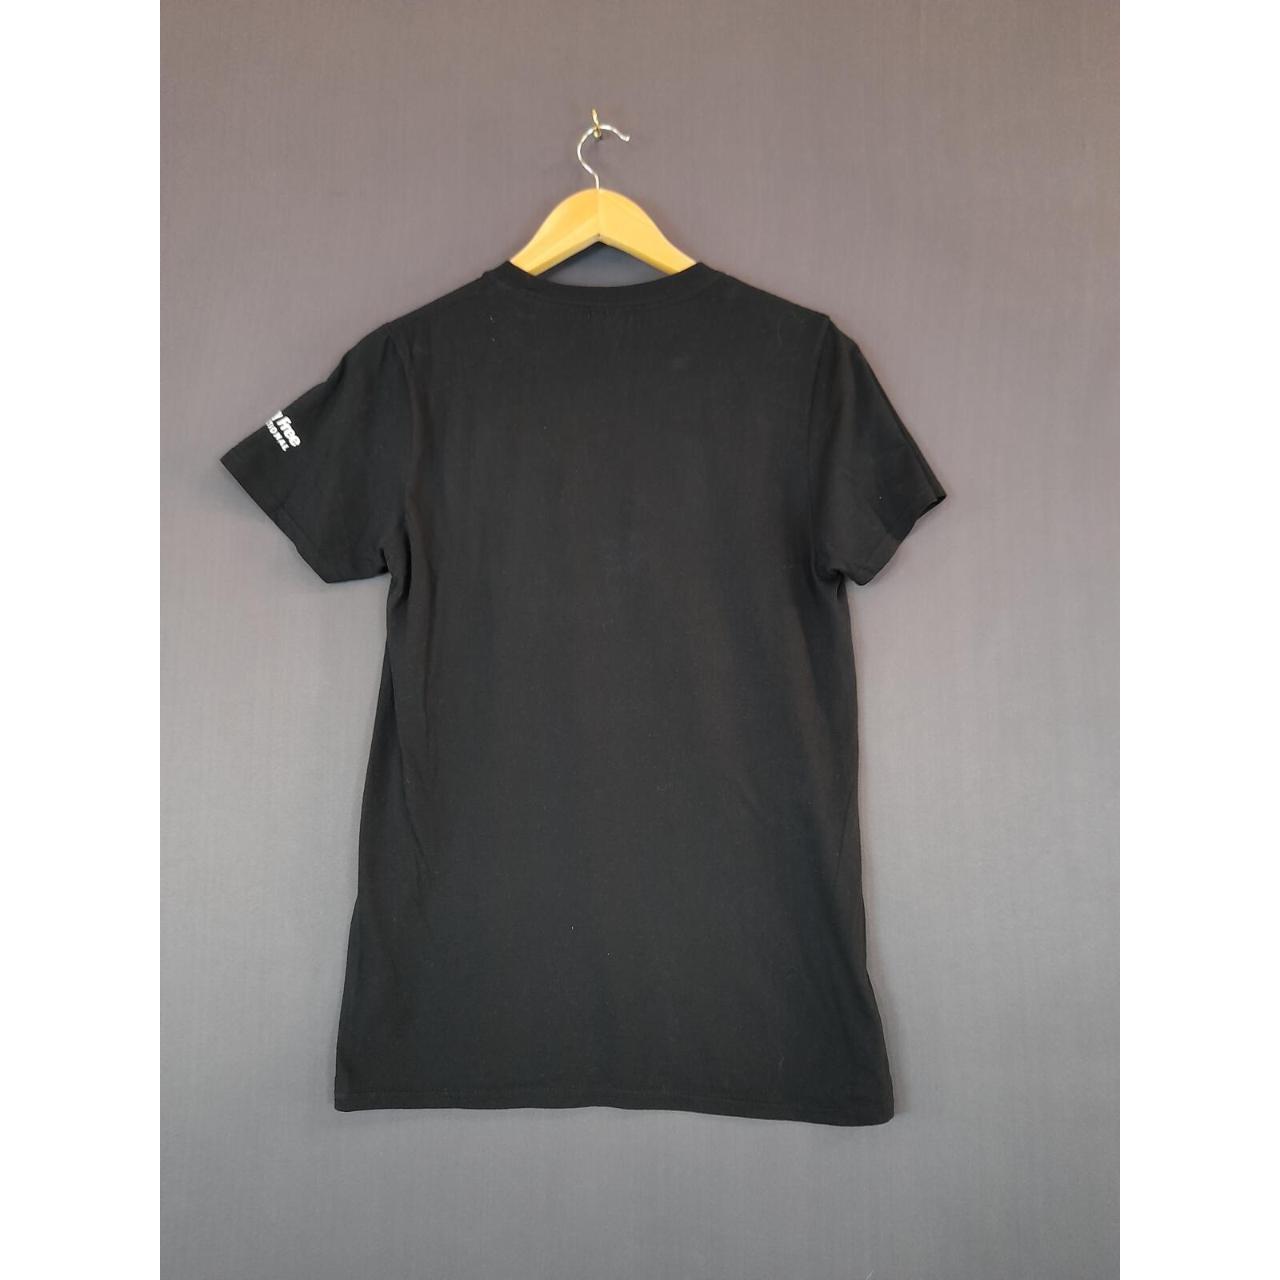 Product Image 2 - Guided Men’s Black Short Sleeves